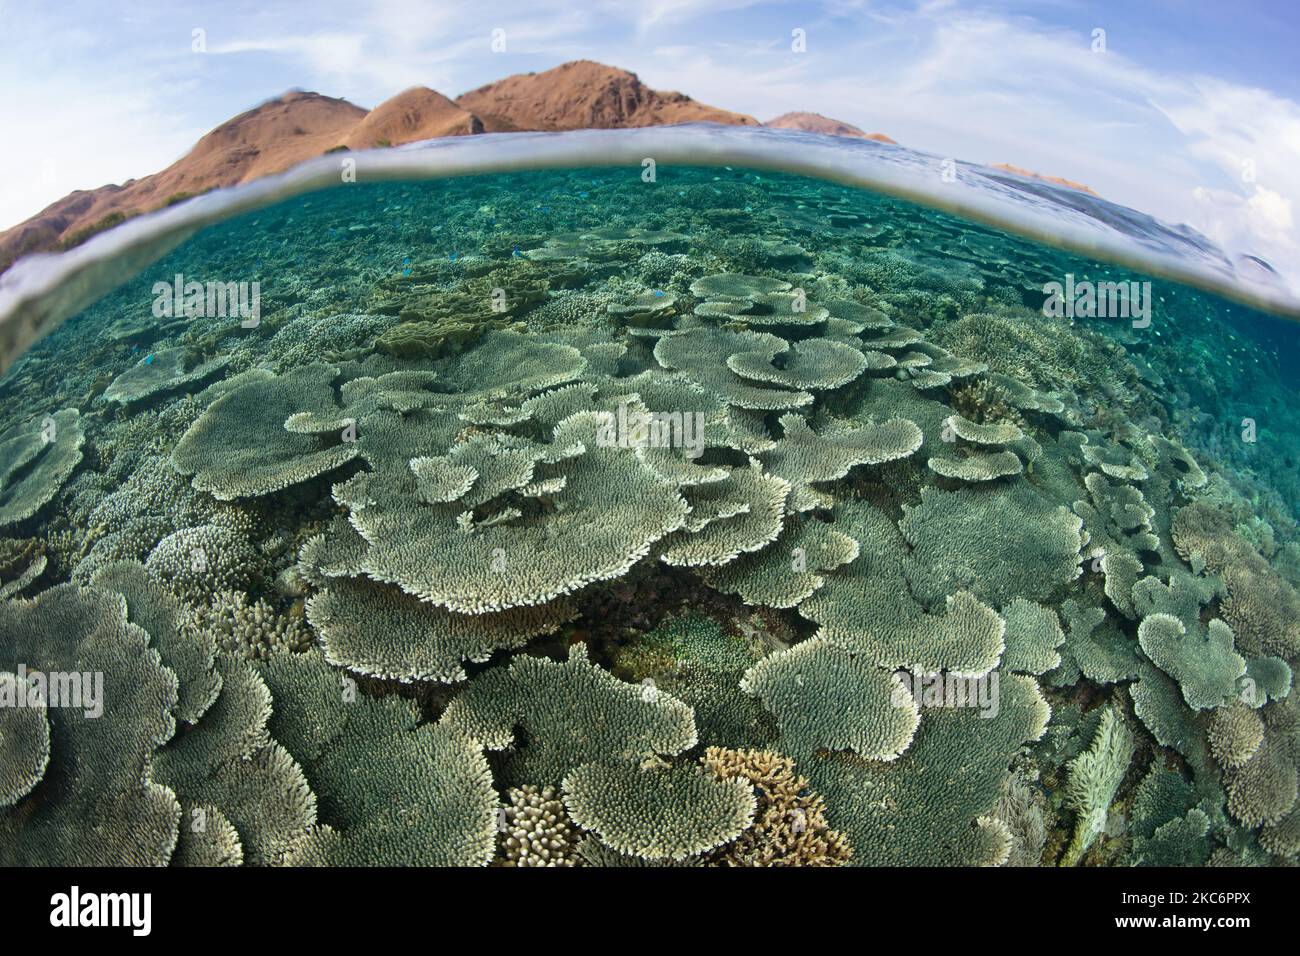 An array of reef-building corals compete for space on a shallow, healthy reef near Komodo, Indonesia. This area as extremely high marine biodiversity. Stock Photo